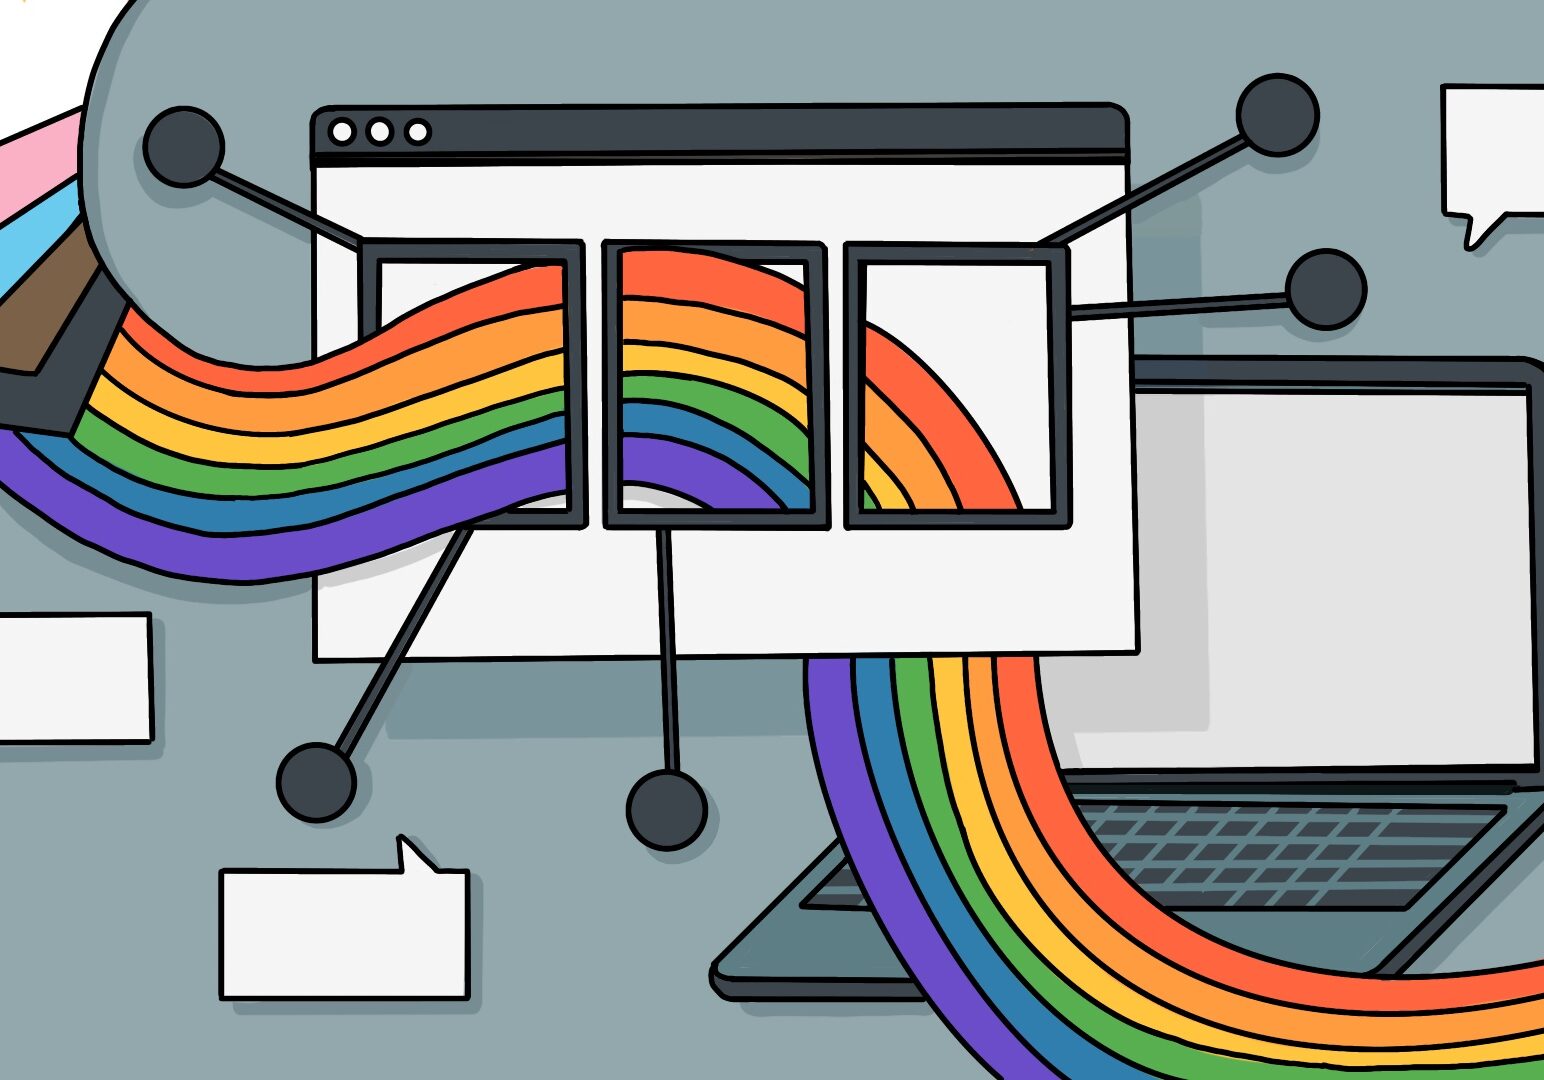 Illustration with a slate grey background, shows a laptop and a computer window open. A pride flag is woven in between the elements on screen.